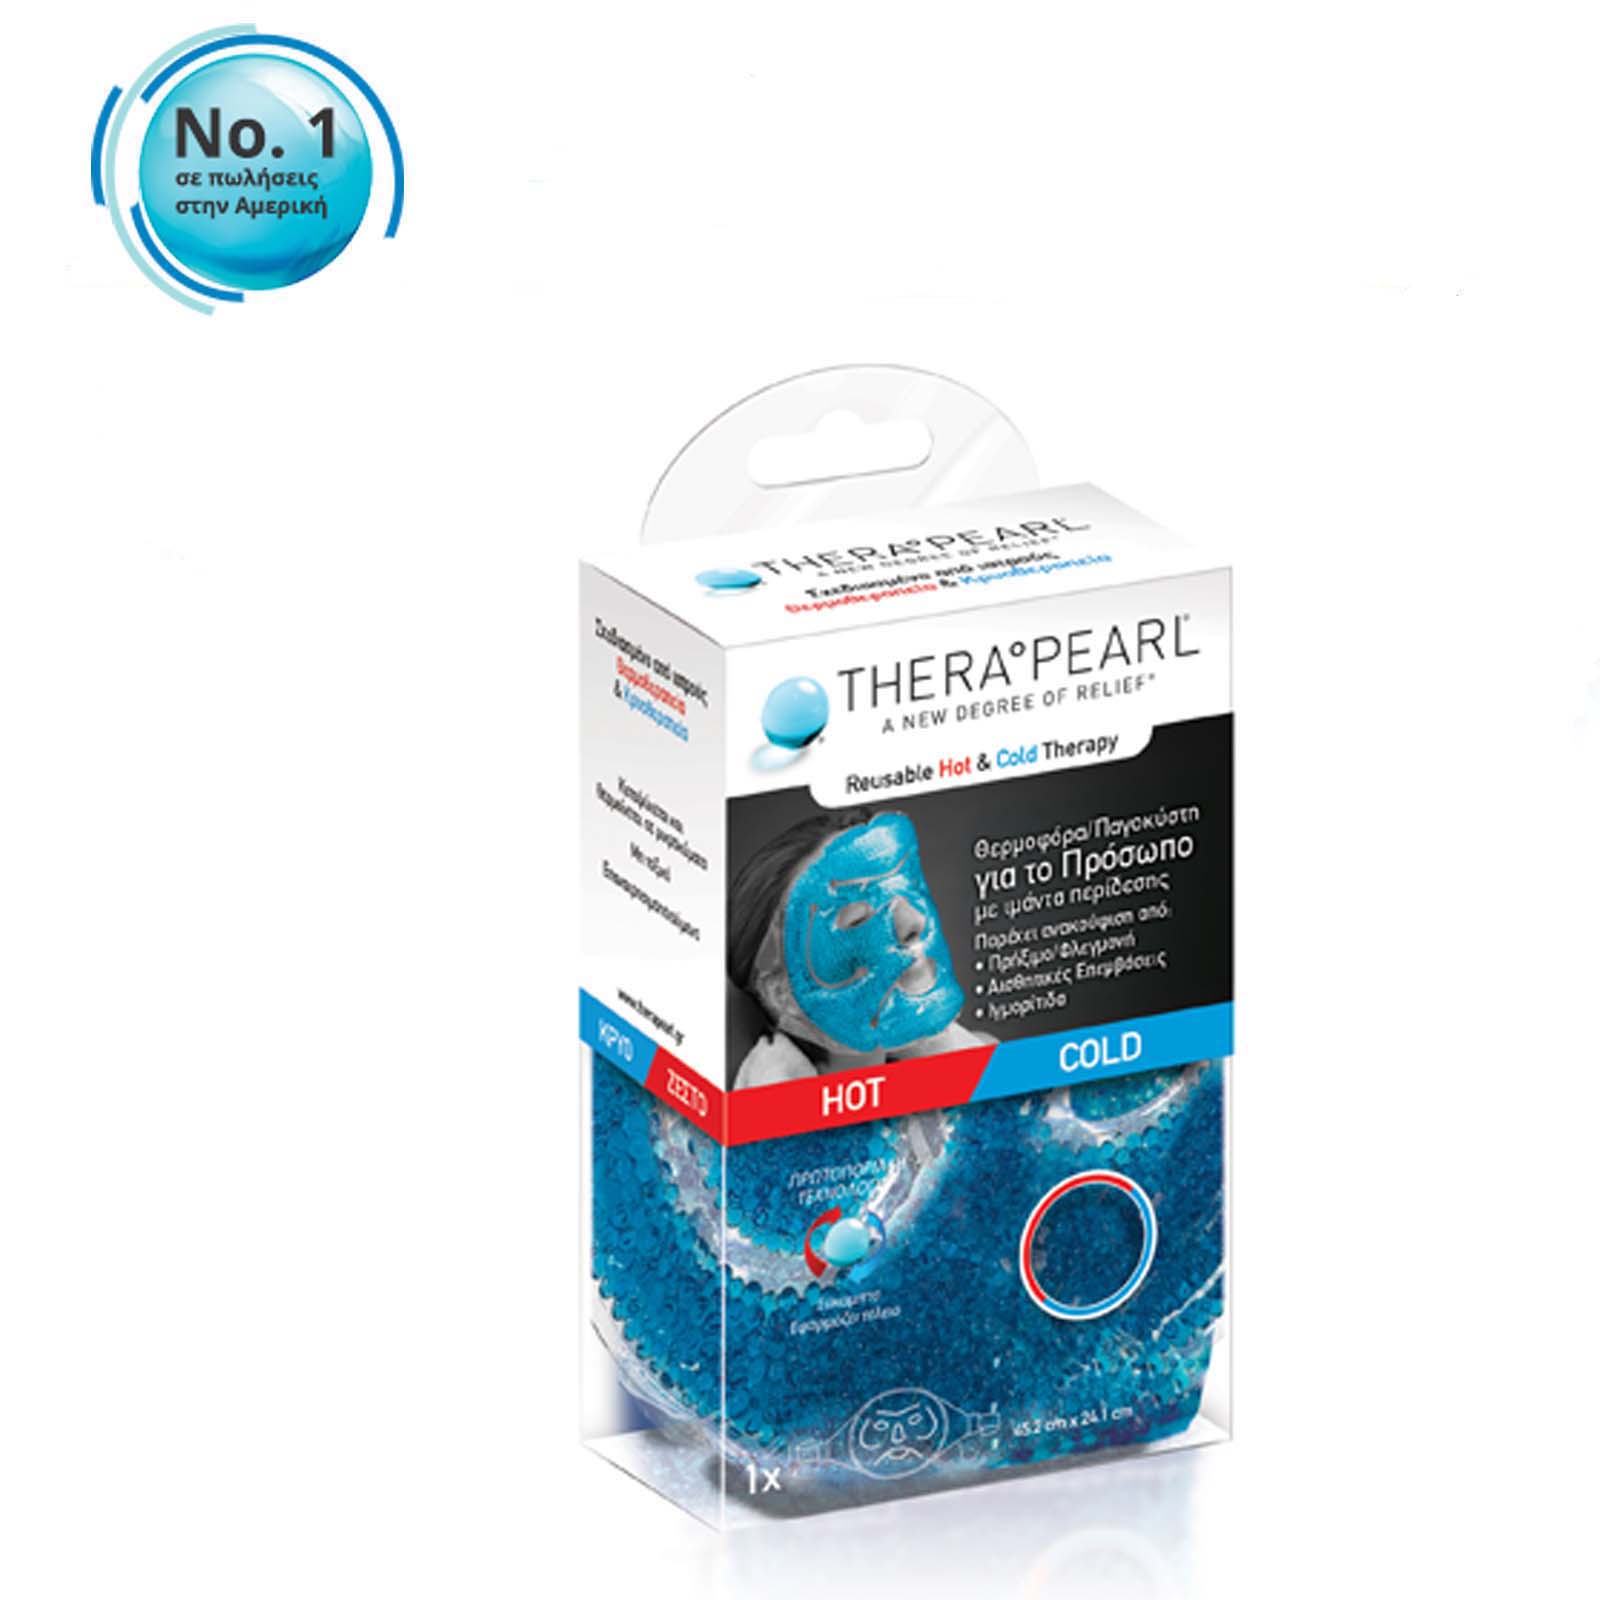 THERAPEARL FACE MASK Hot / cold Pack 